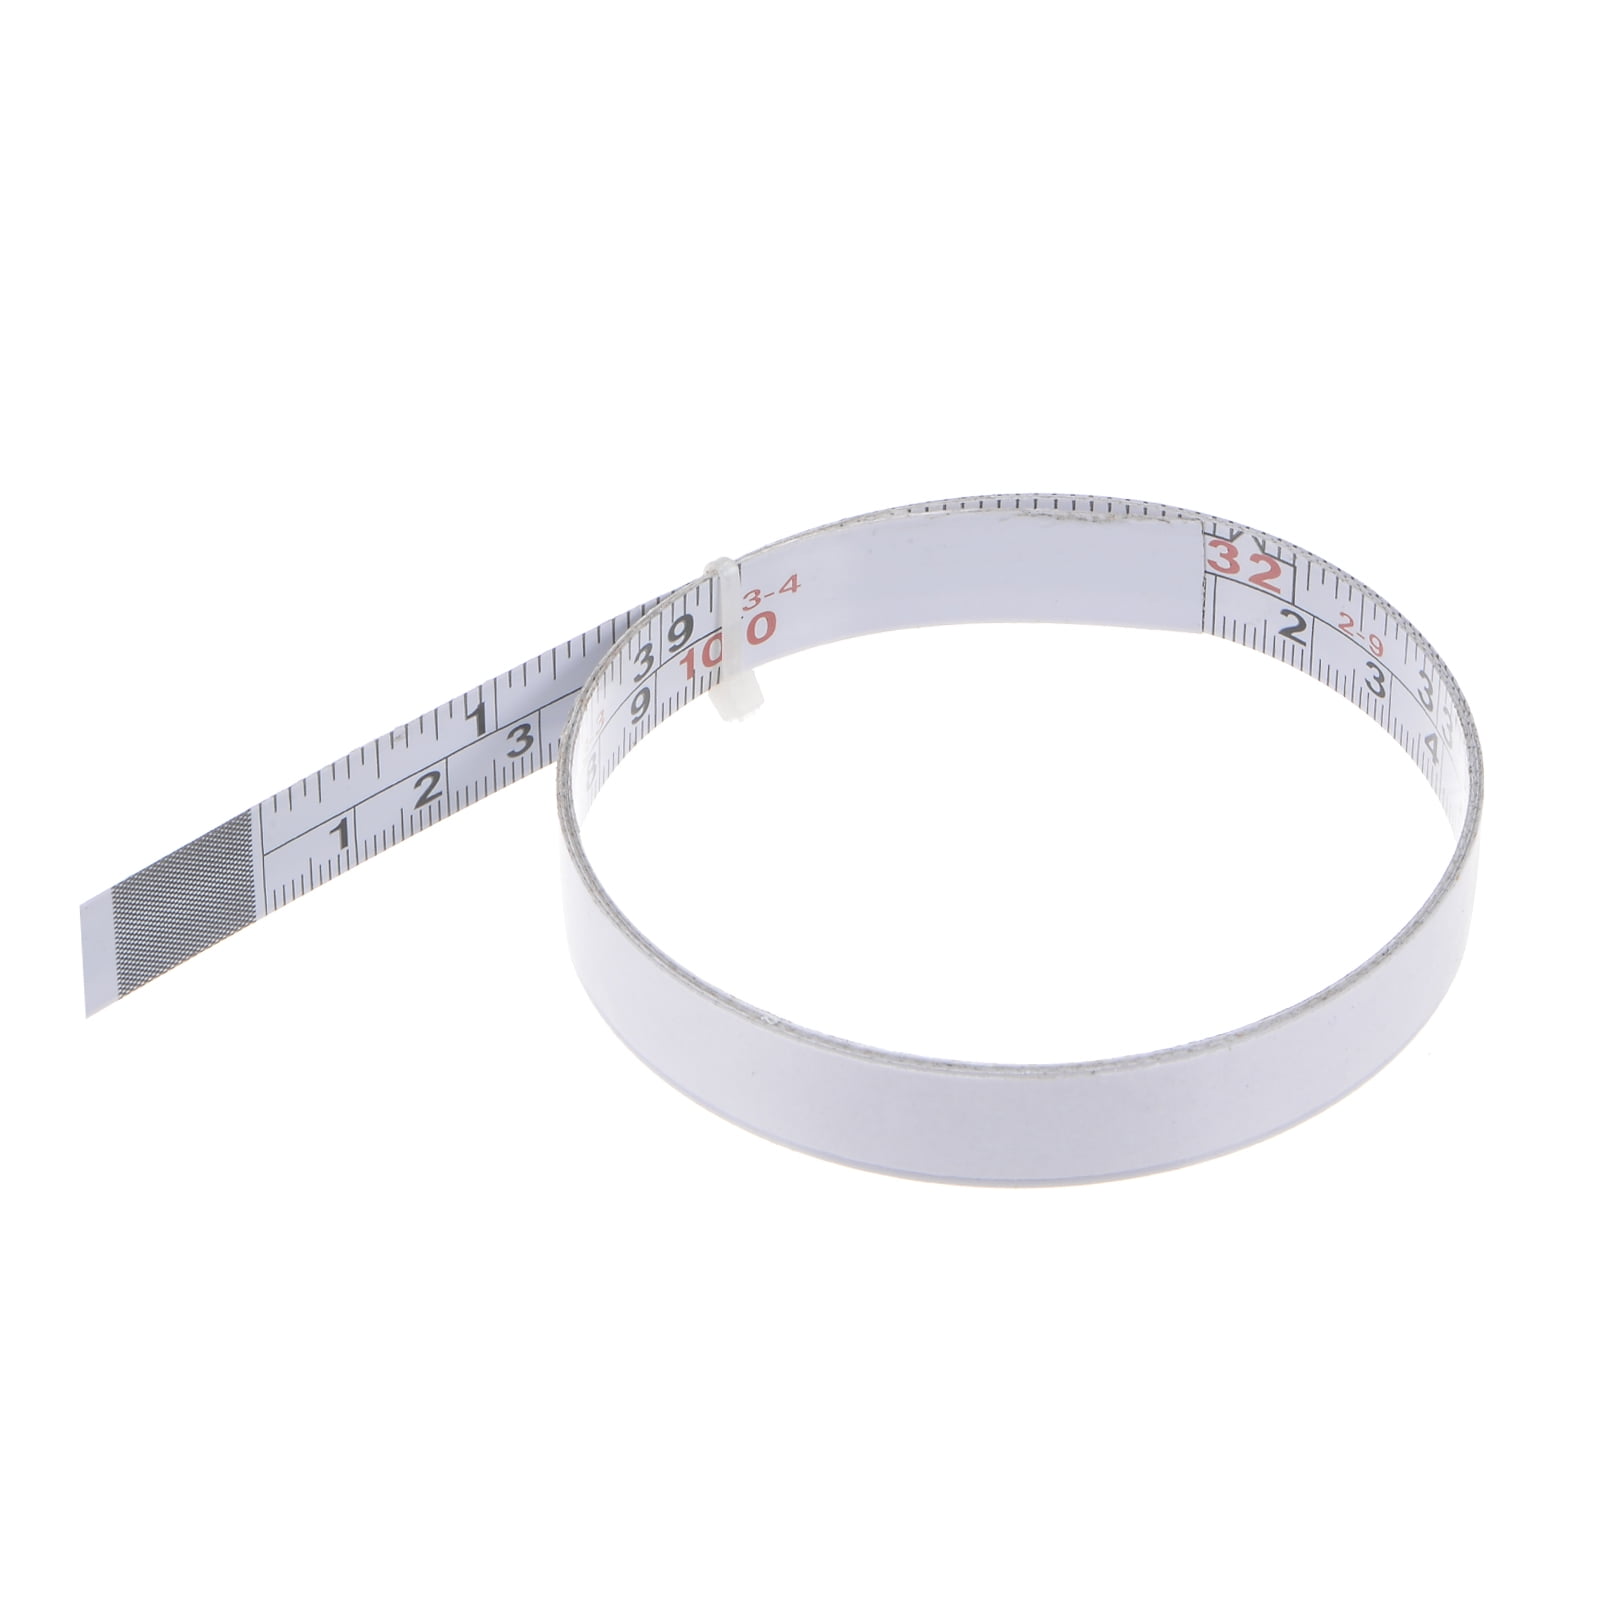 uxcell Adhesive Backed Tape Measure 40 Inches Peel and Stick